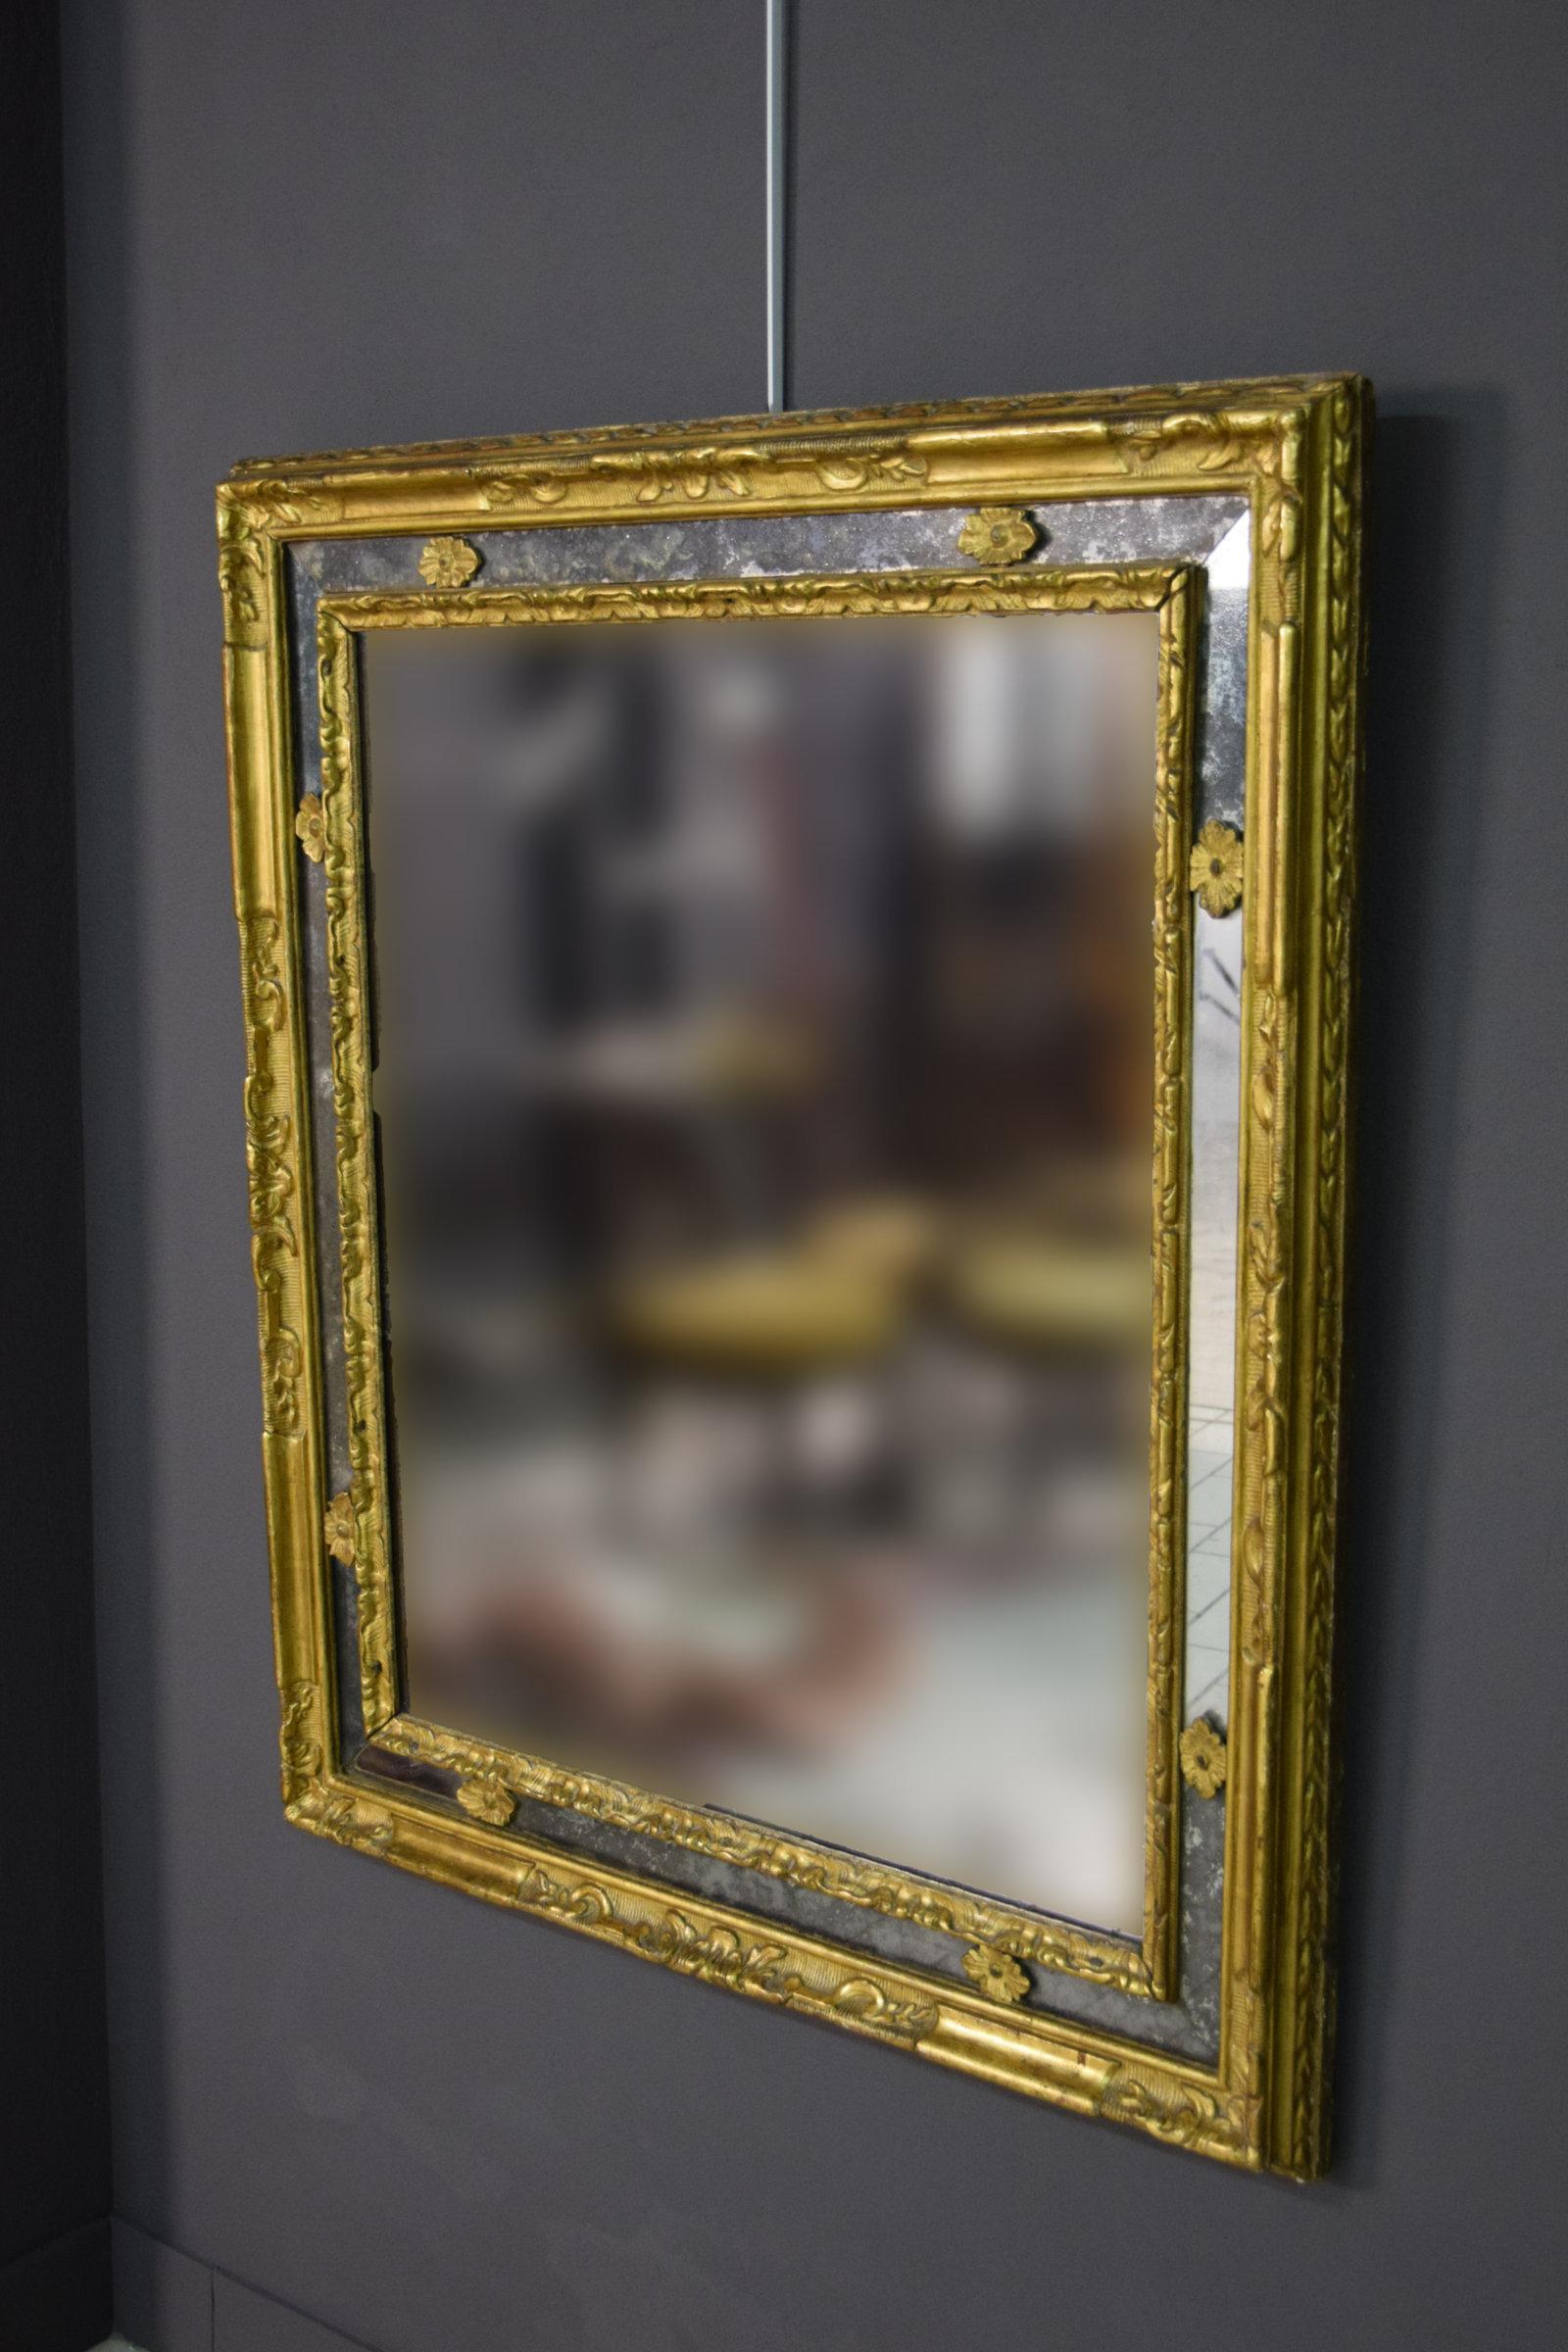 18th century, Italian rectangular mirror with carved and giltwood frame
North Italy (Turin), mid-18th century

The mirror, made in north Italy (Turin) in the mid-18th century, has a rectangular wood frame, composed of three concentric sections.